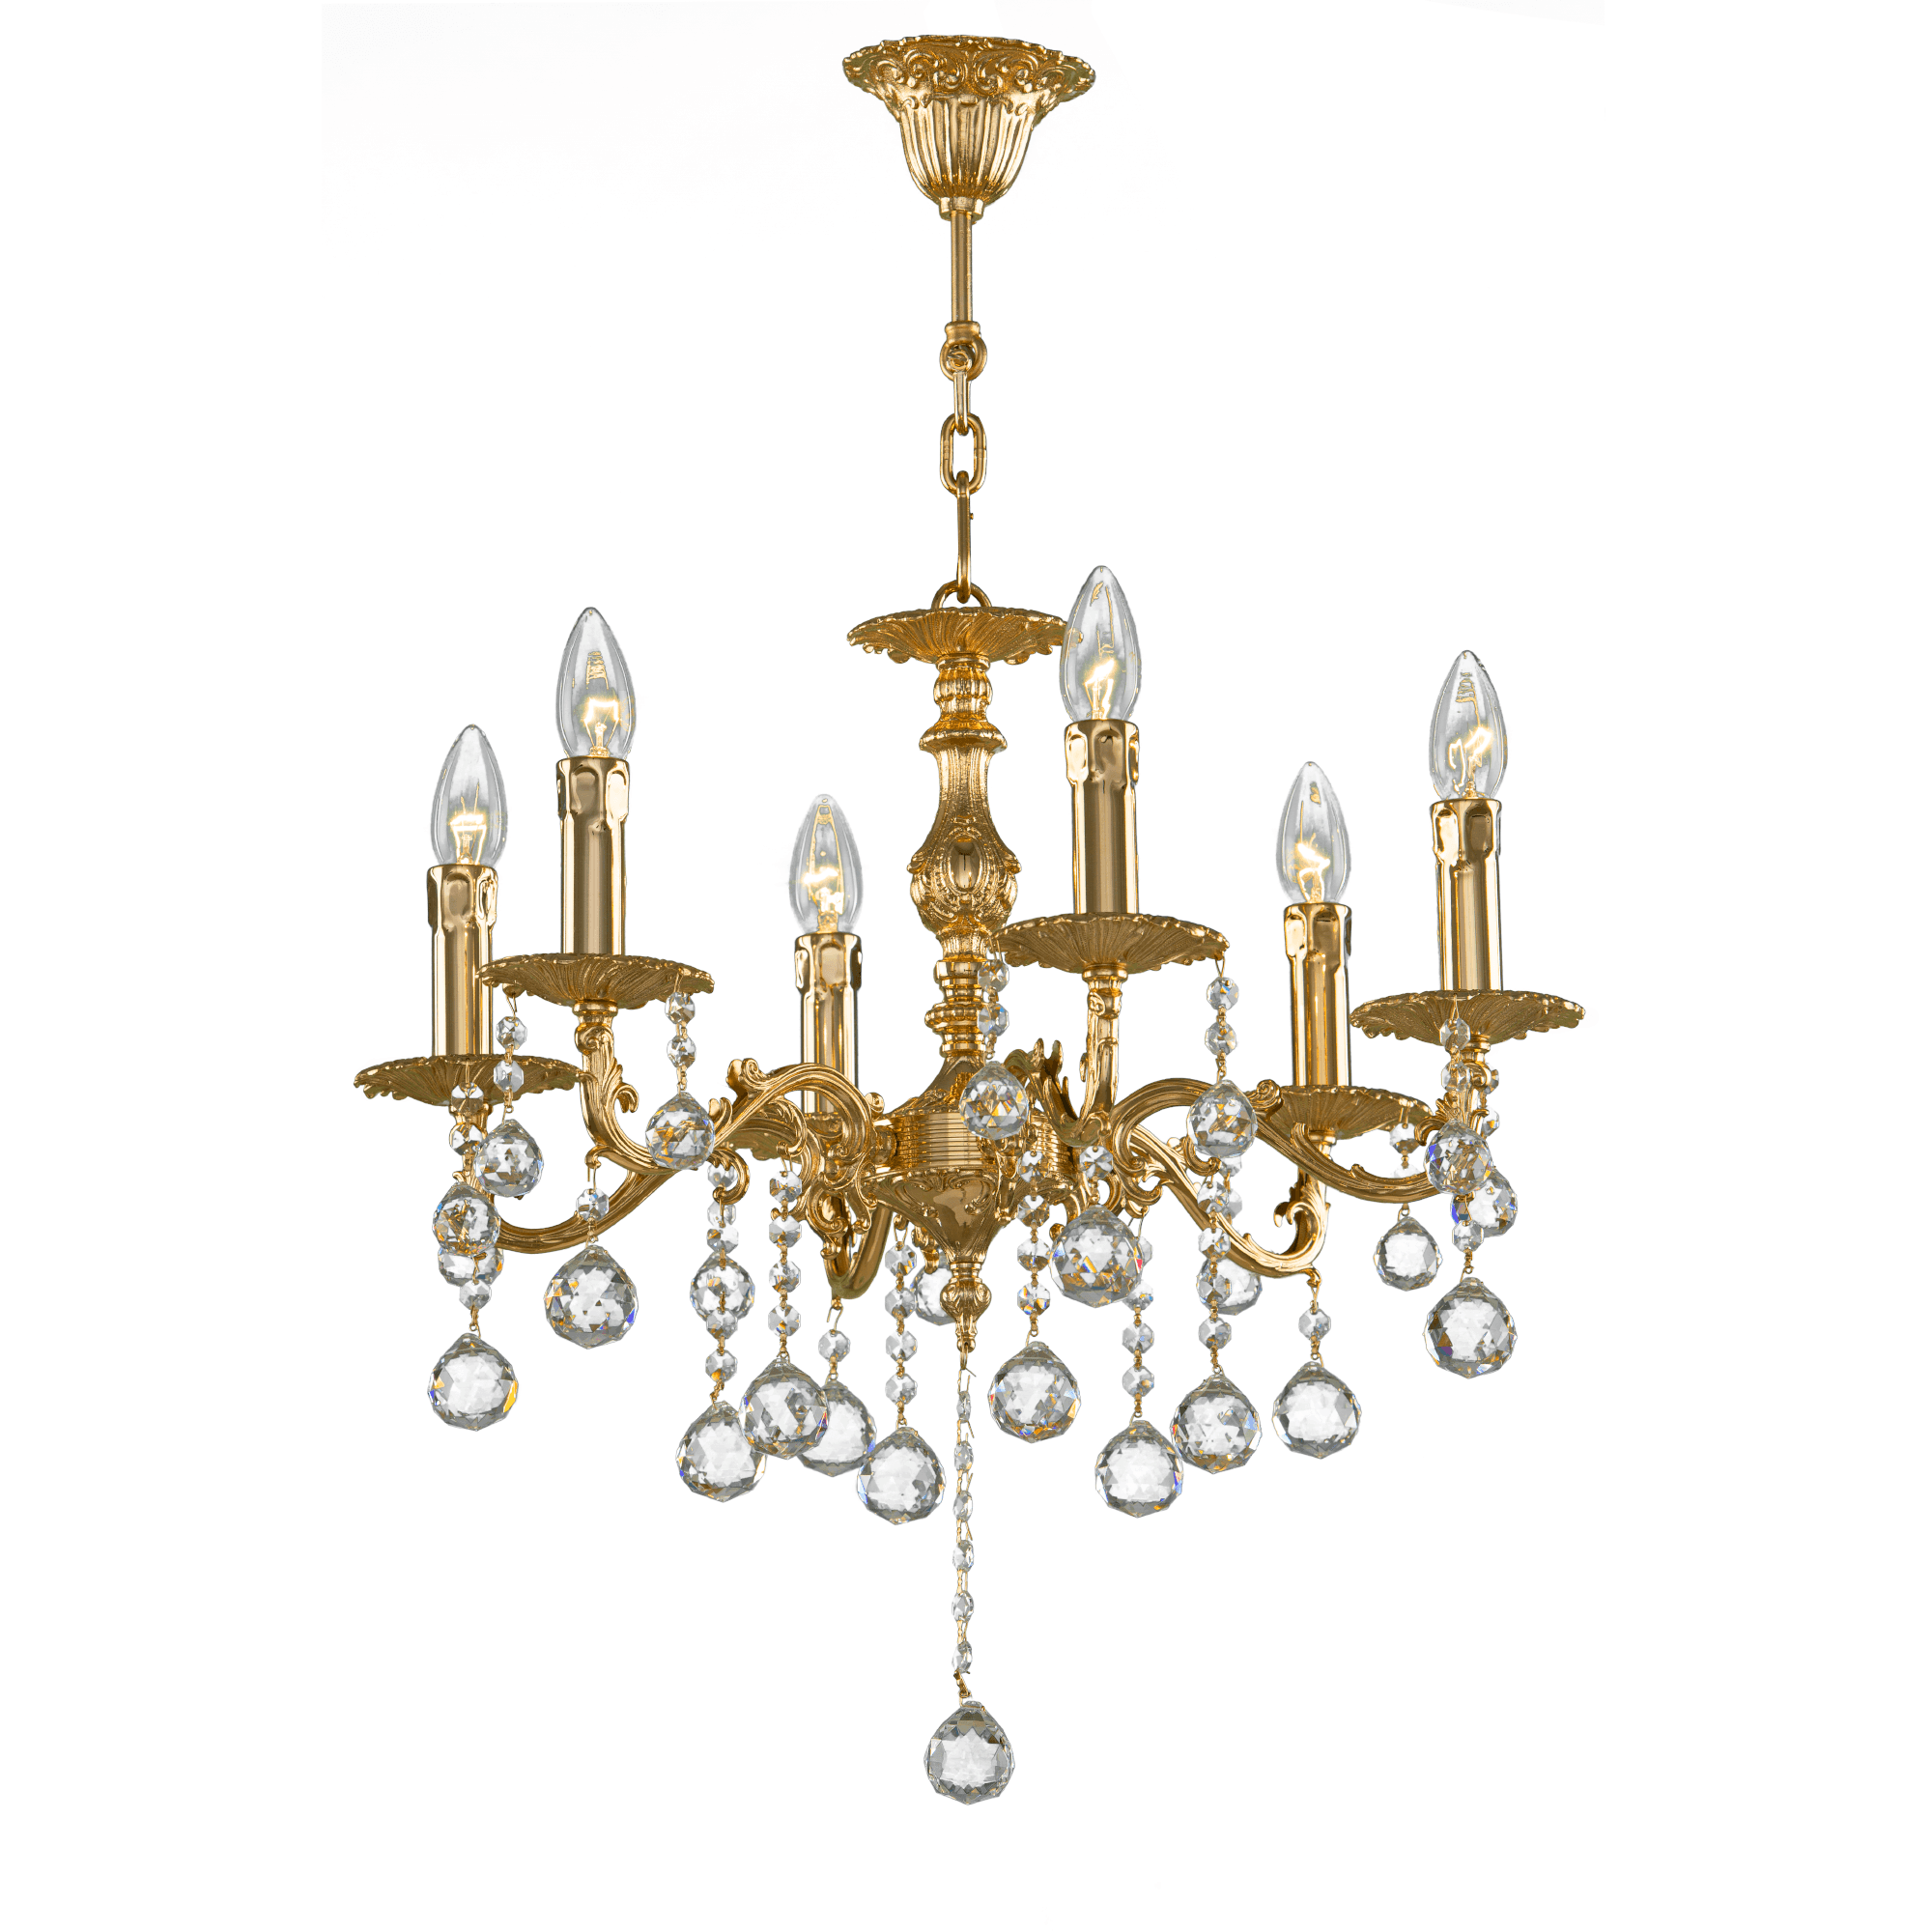 Asfour-Crystal-Lighting-Brass-Collection-Brass-Chandelier-6-Bulbs-Gold